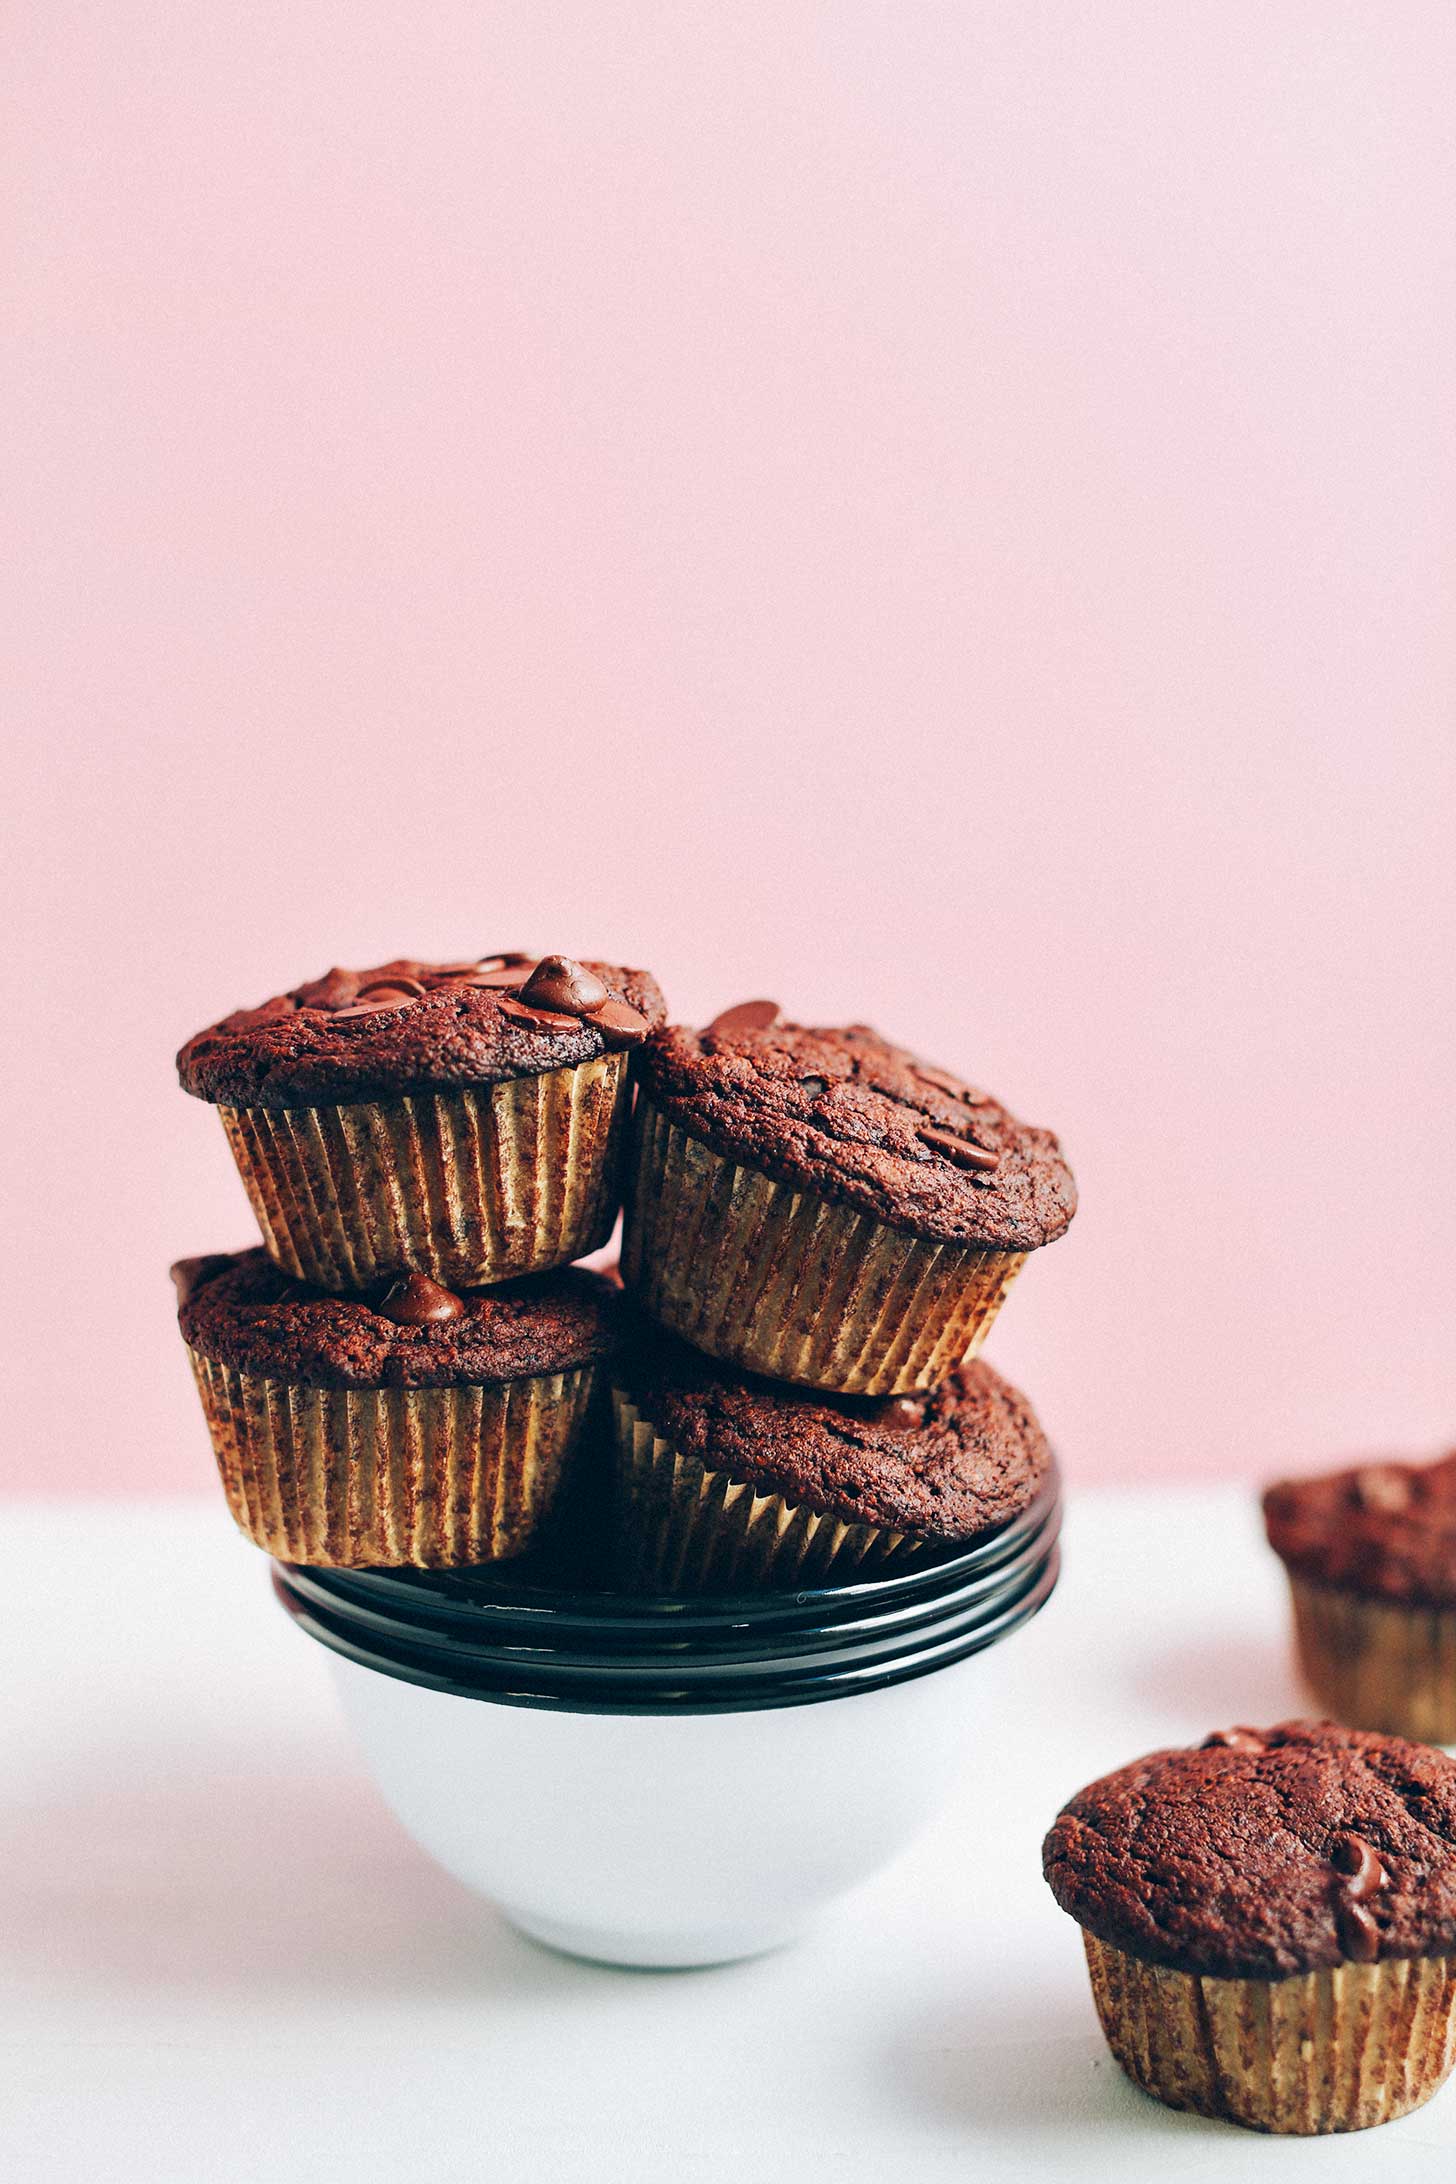 Bowl of stacked gluten-free Vegan Double Chocolate Muffins